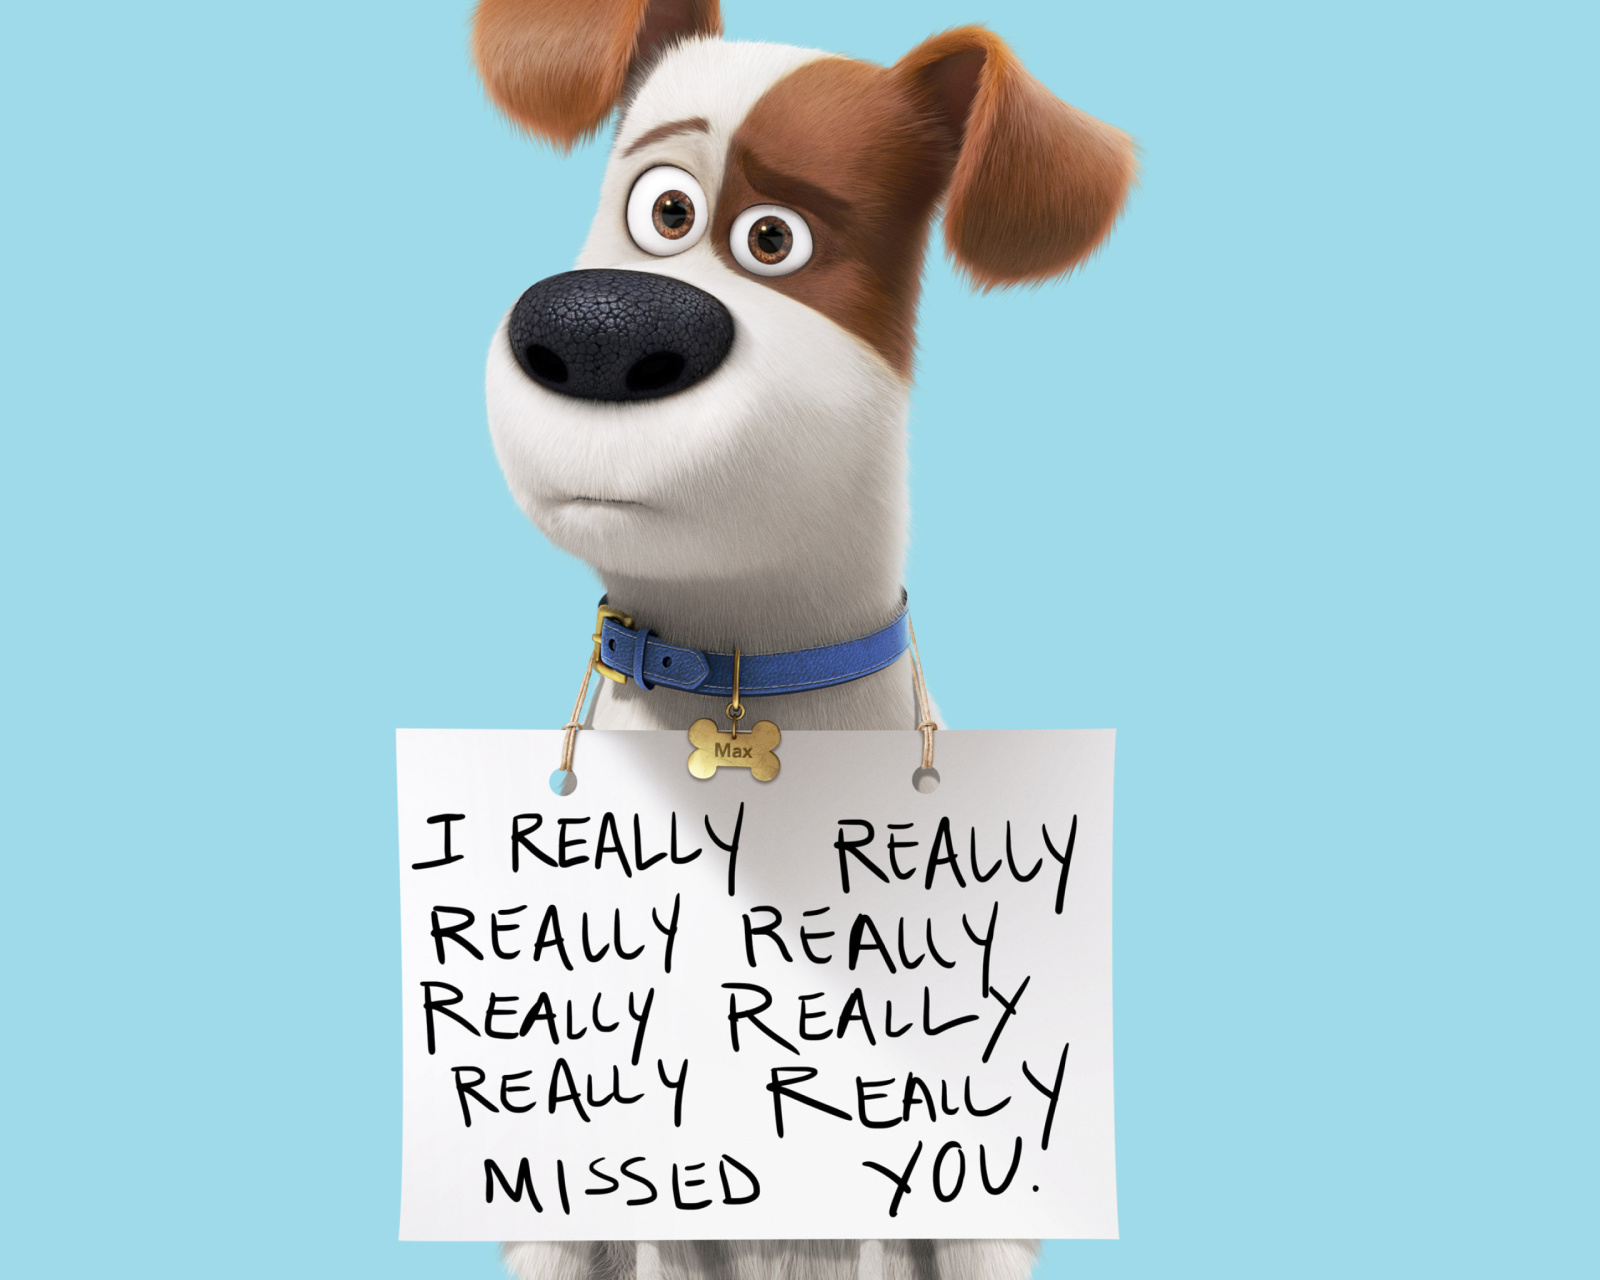 Max from The Secret Life of Pets wallpaper 1600x1280